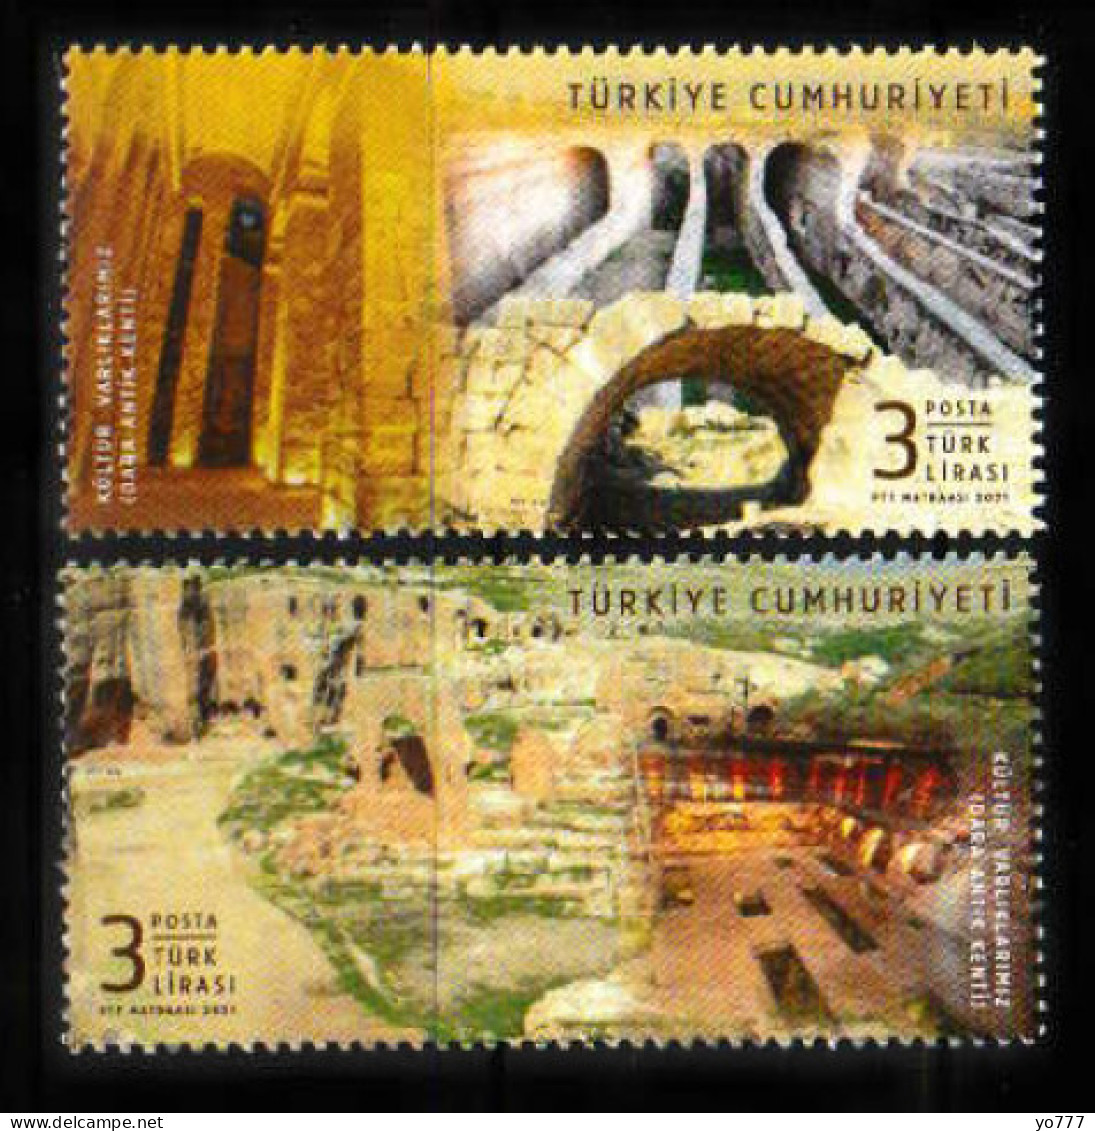 (4547-48) OUR CULTURAL ASSETS (ANCIENT CITY OF DARA) MNH** - Nuovi